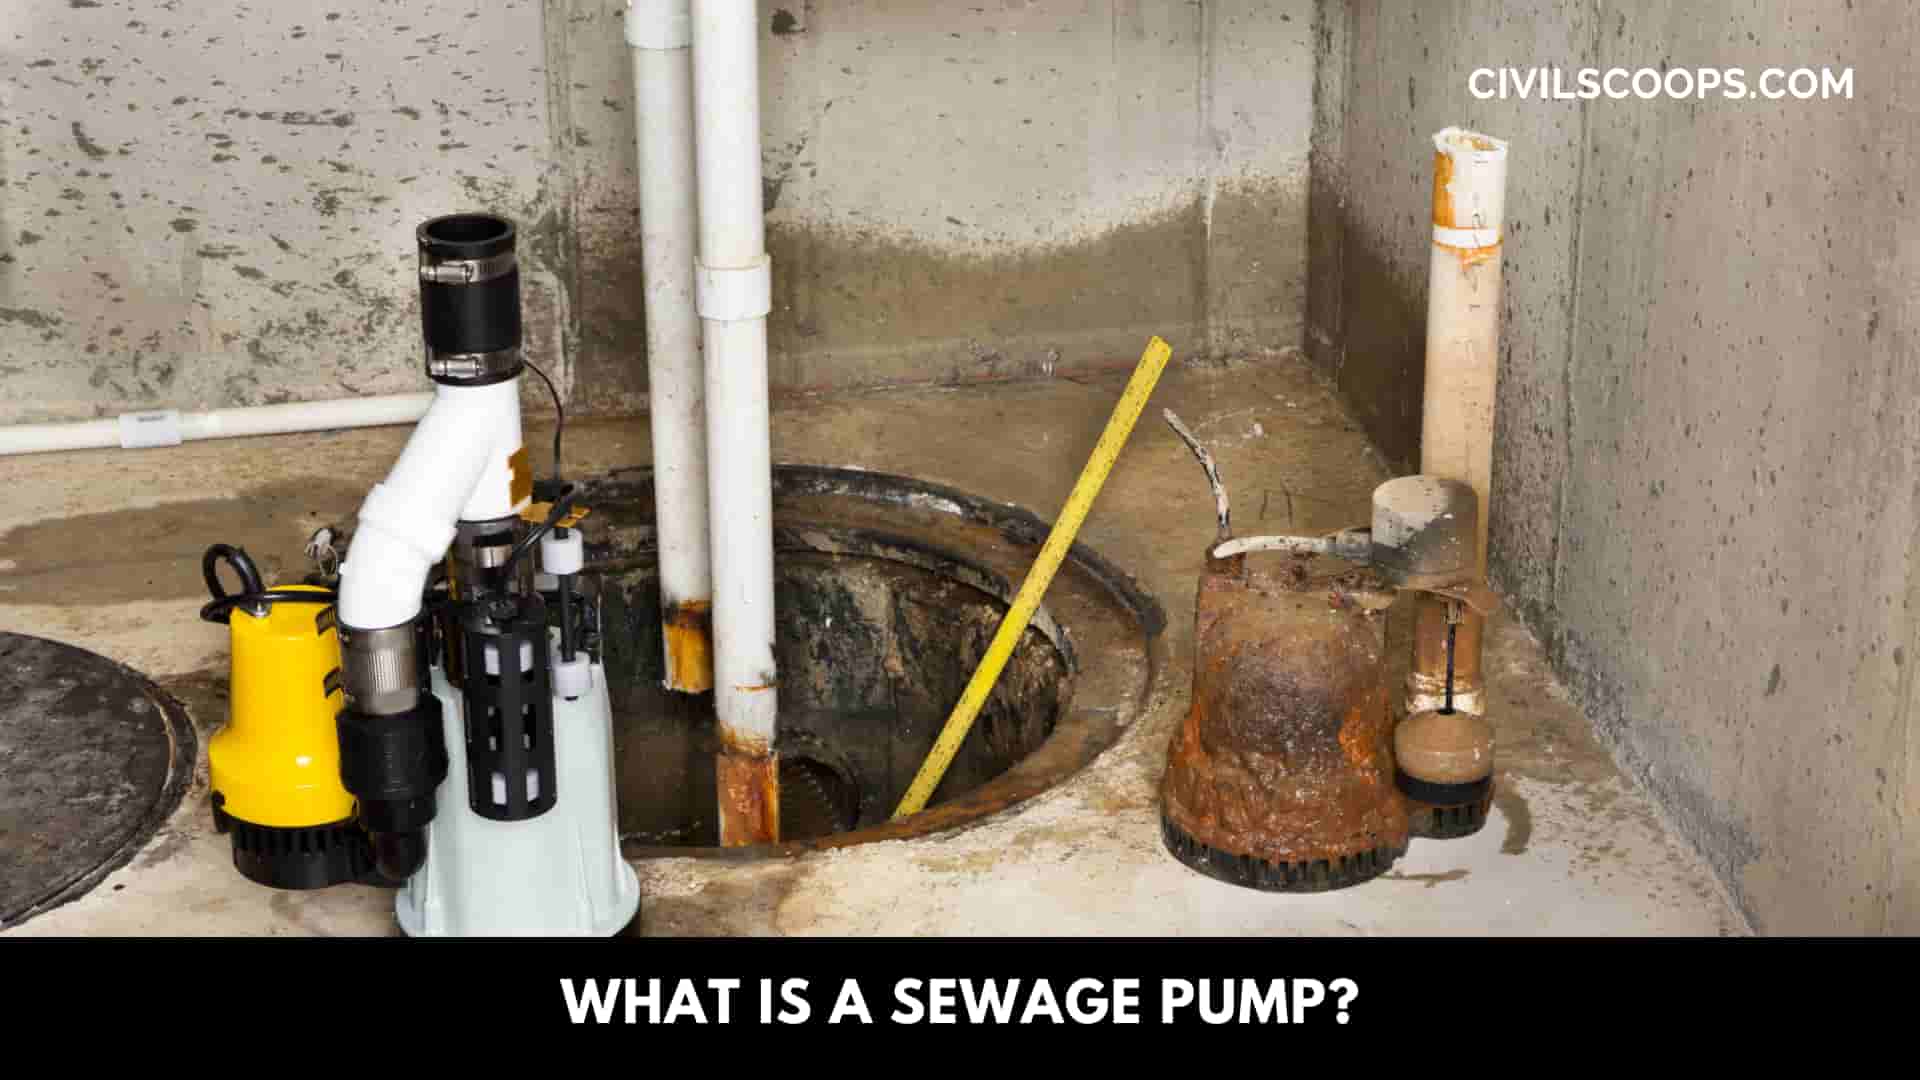 What Is a Sewage Pump?